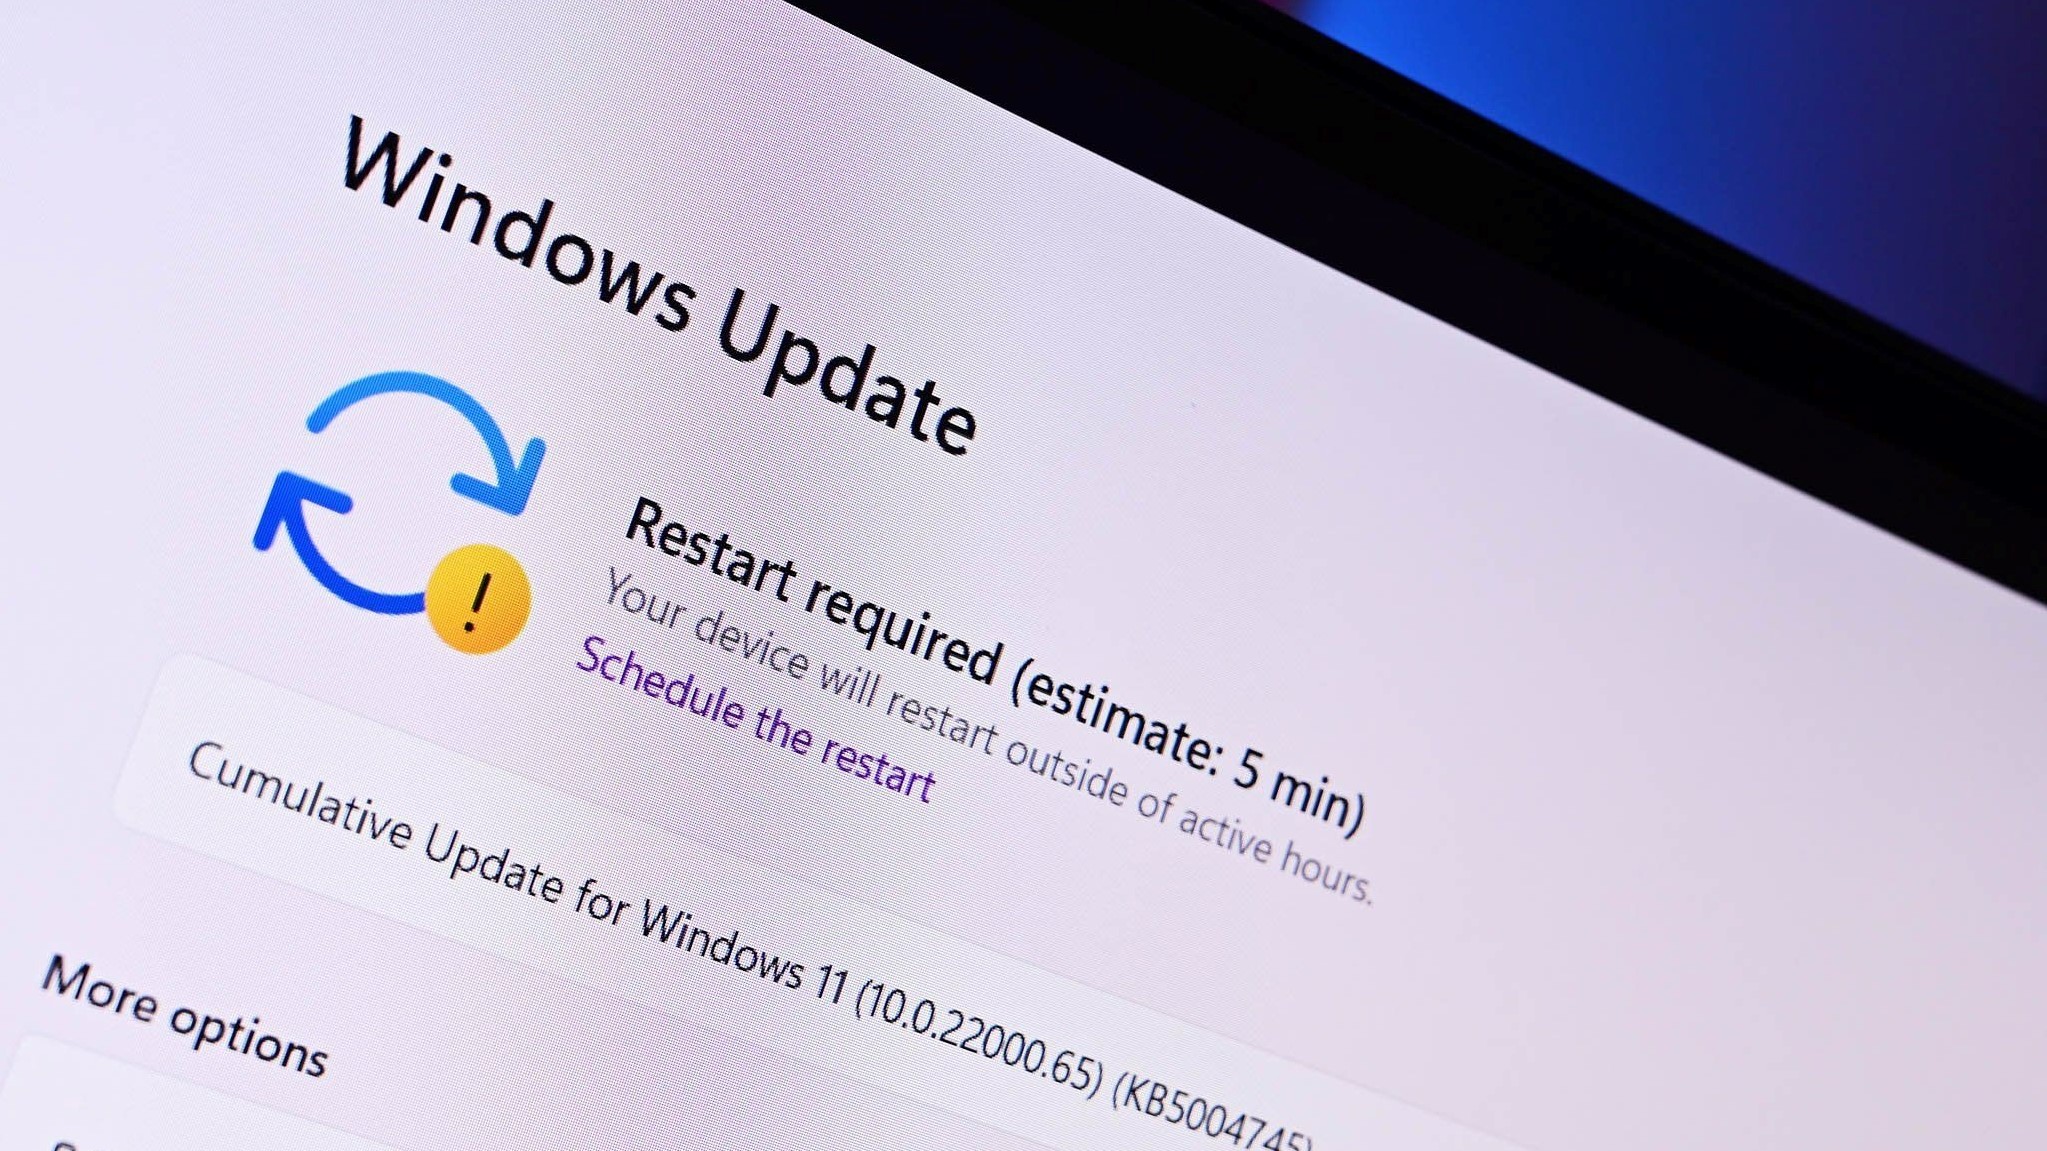 Microsoft wants to update your Windows 11 PC without forcing you to reboot